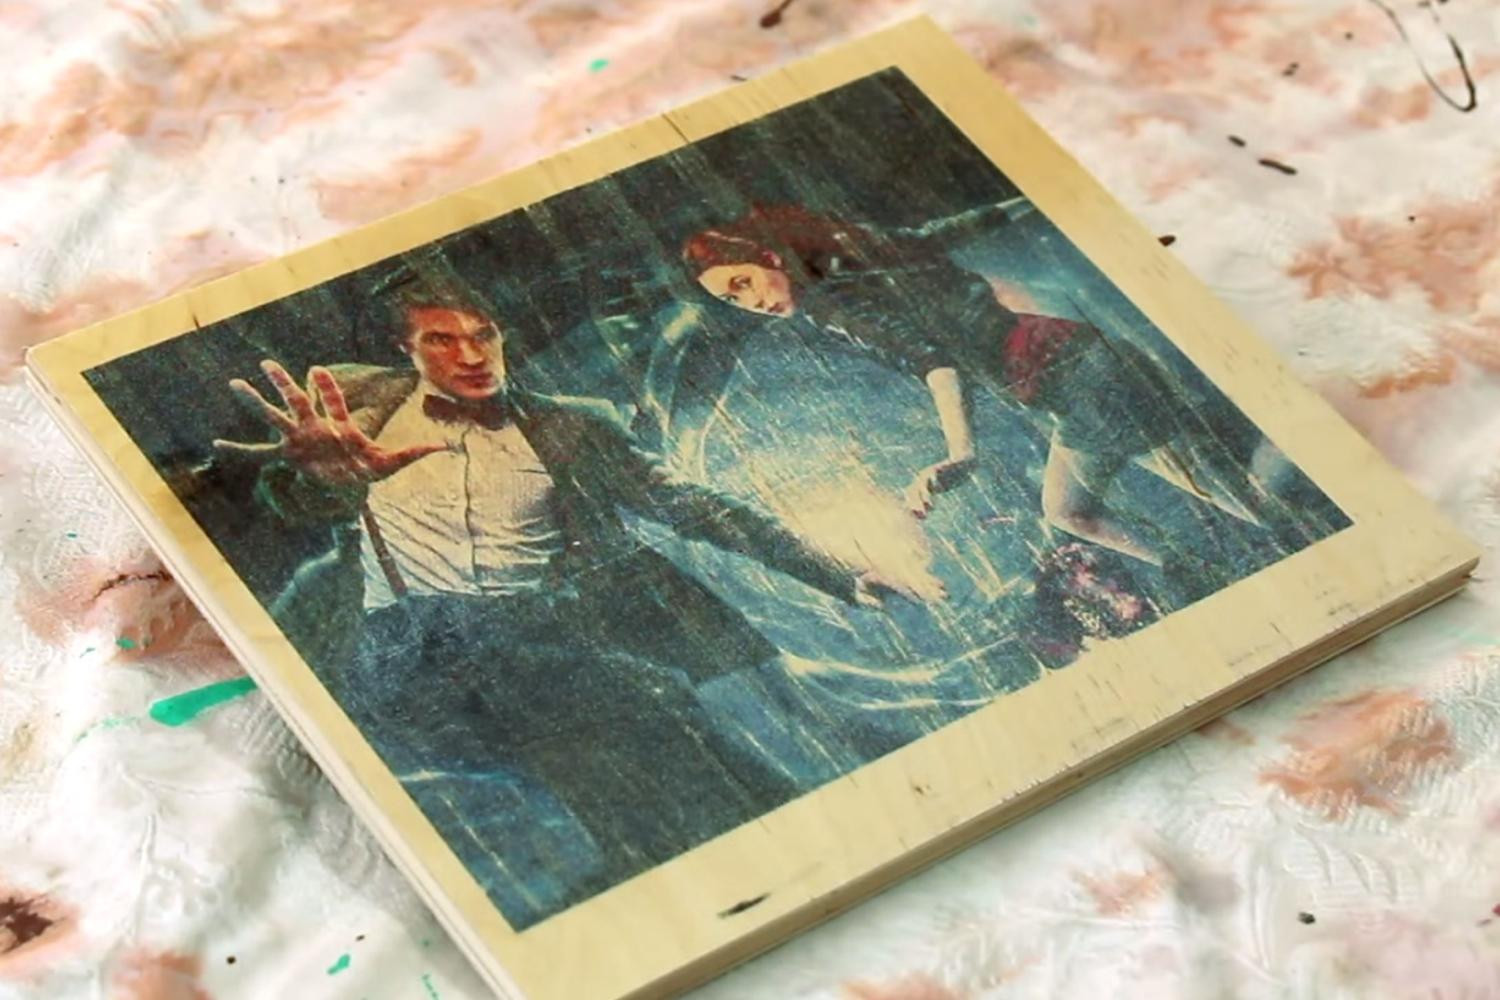 DIY Printing On Wood
 DIY video shows you how to print on wood with an inkjet